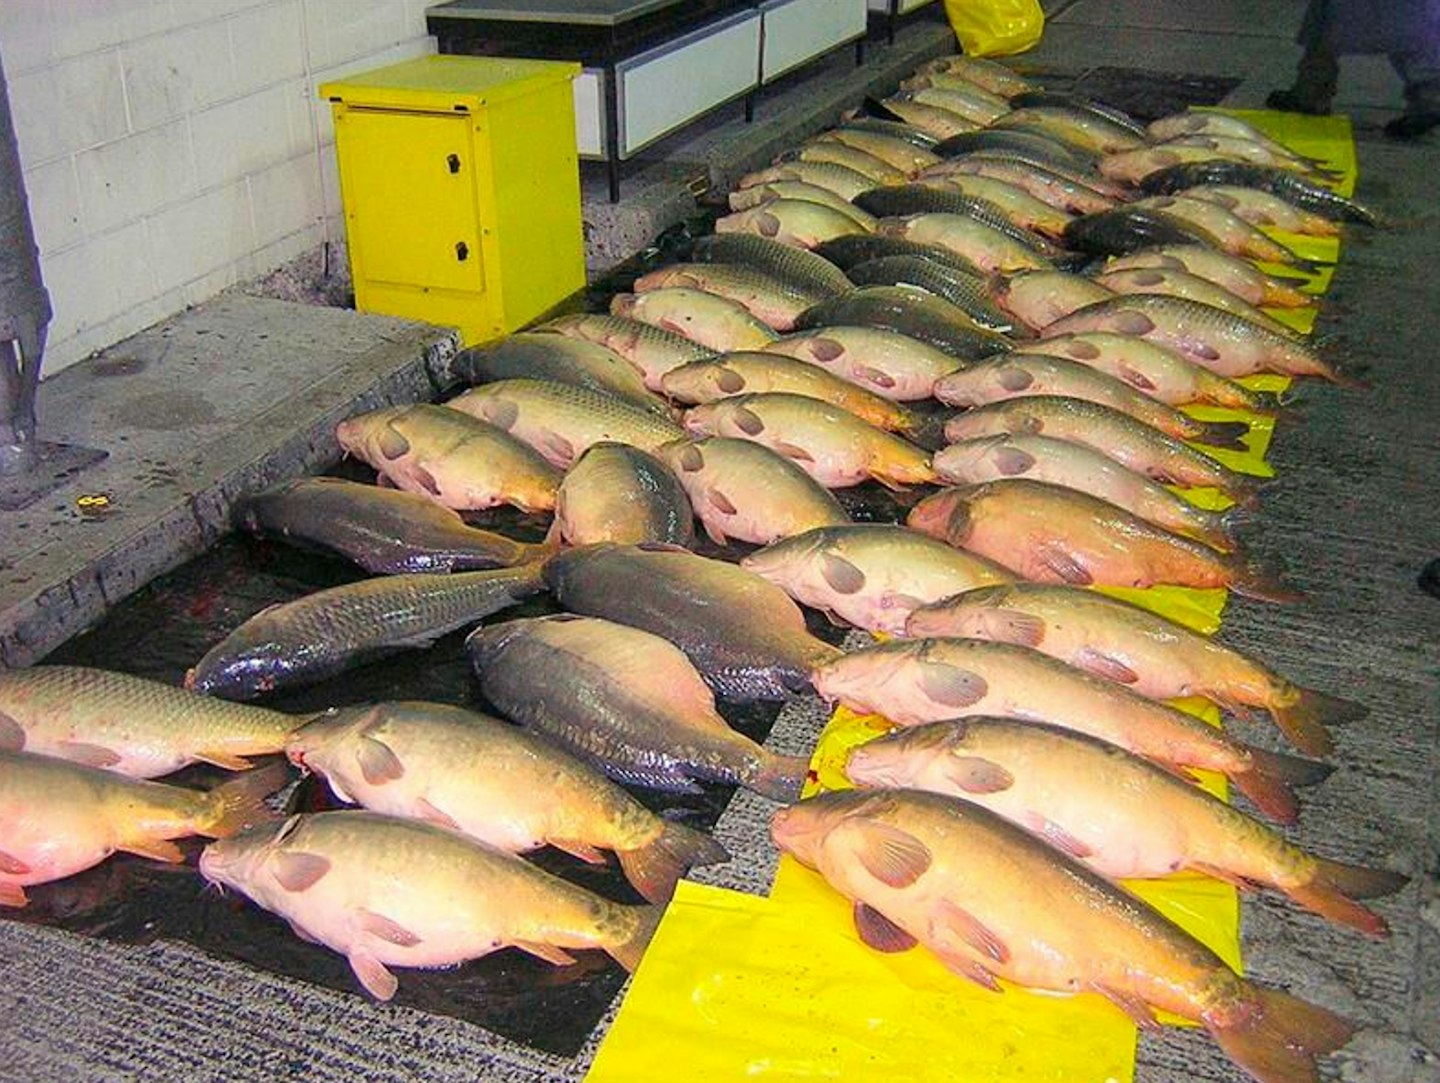 The 2010 haul of 120 big carp at Dover netted the perpetrators a £10,000 fine